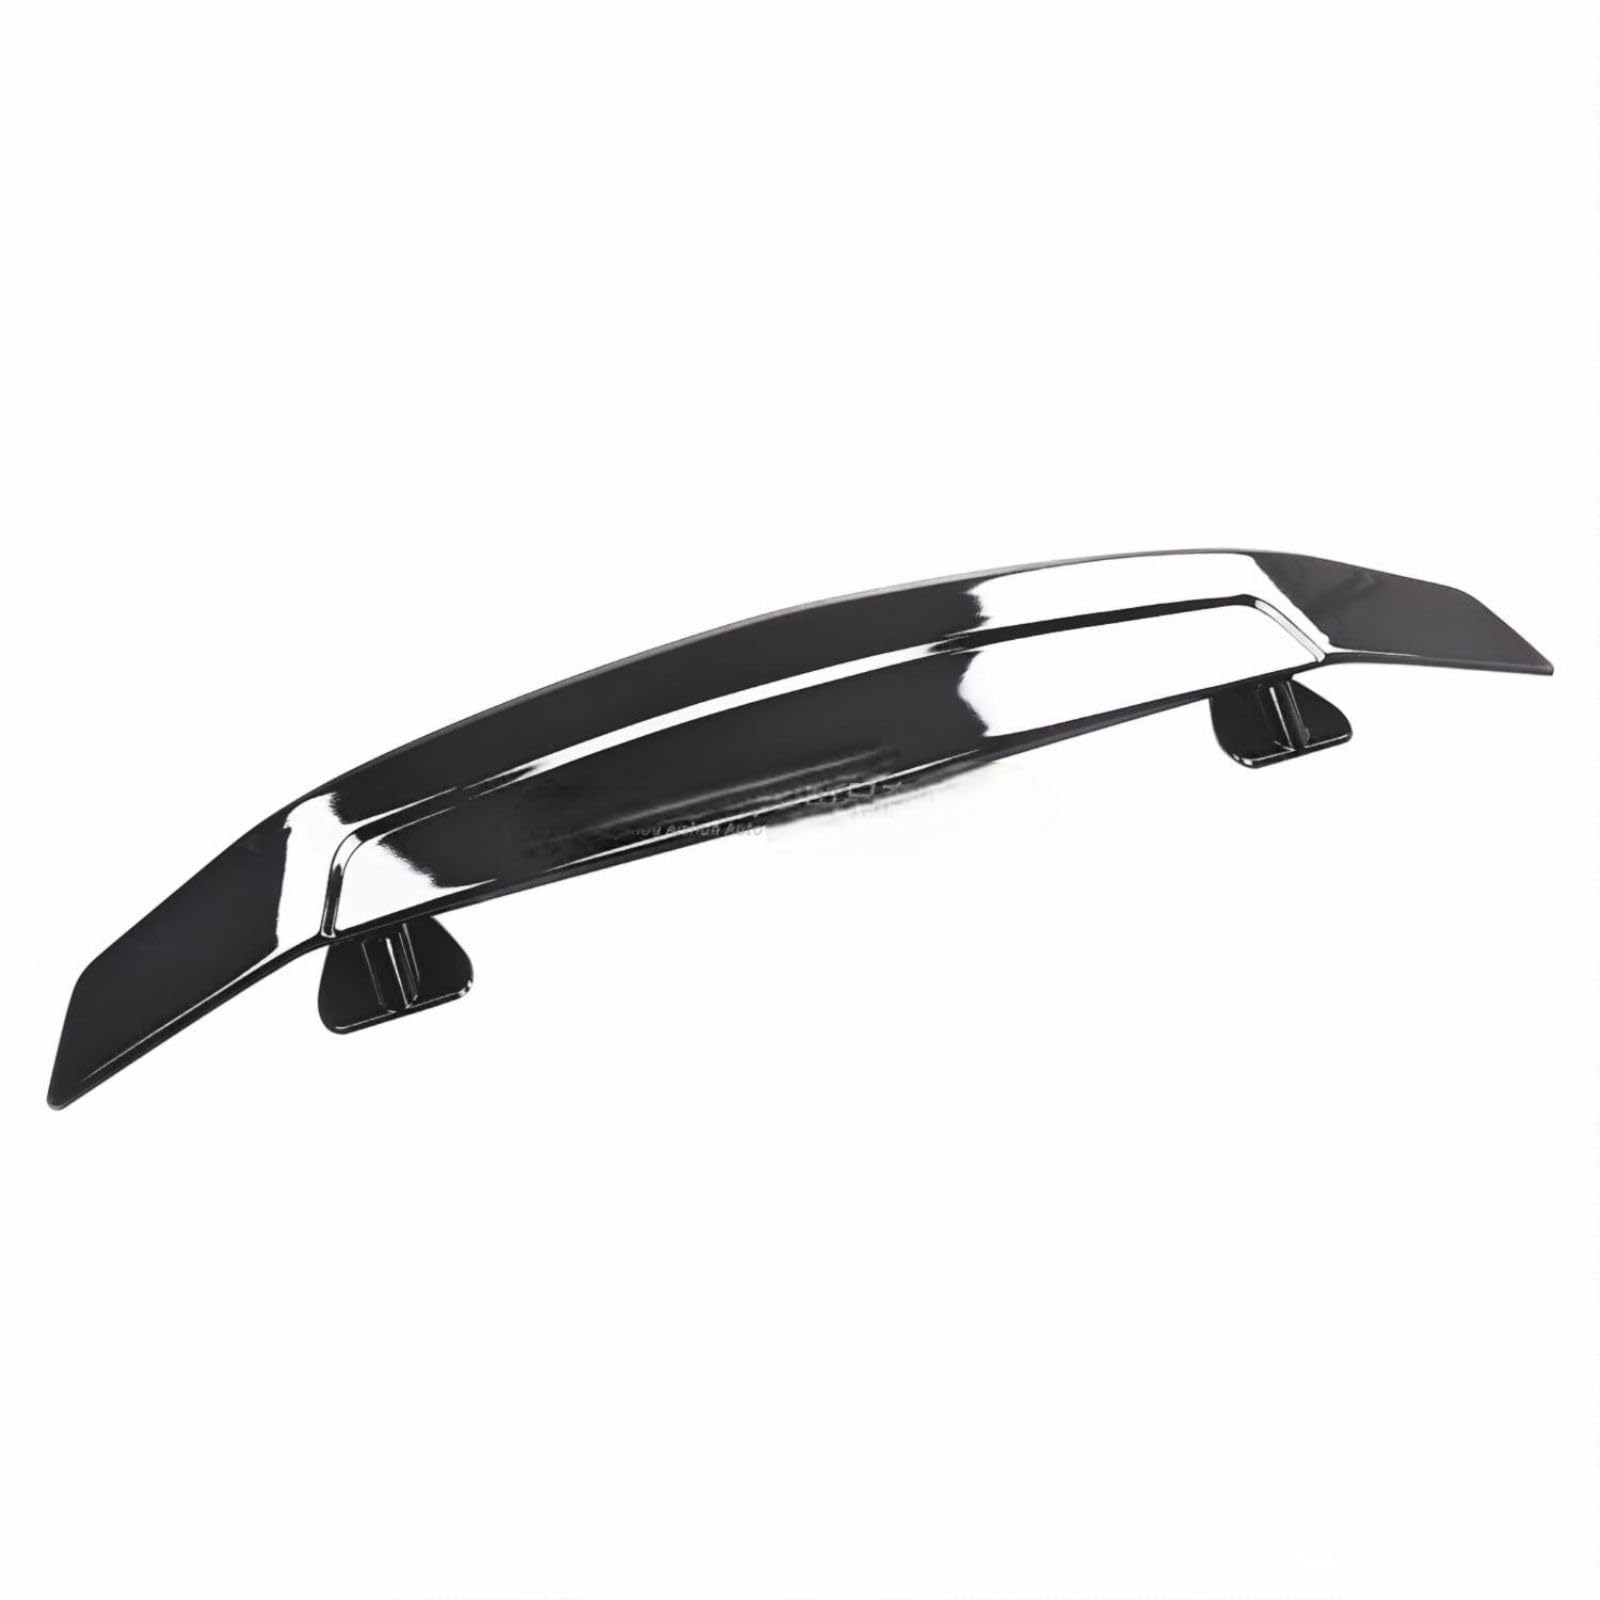 Car Rear Spoiler für Ford Mondeo III Hatchback 2007-2010, Rear Wing Scratch-Resistant Boot Rear Spoiler Wings Lip Car Styling Accessories,Bright Black von EESWCSZZ3